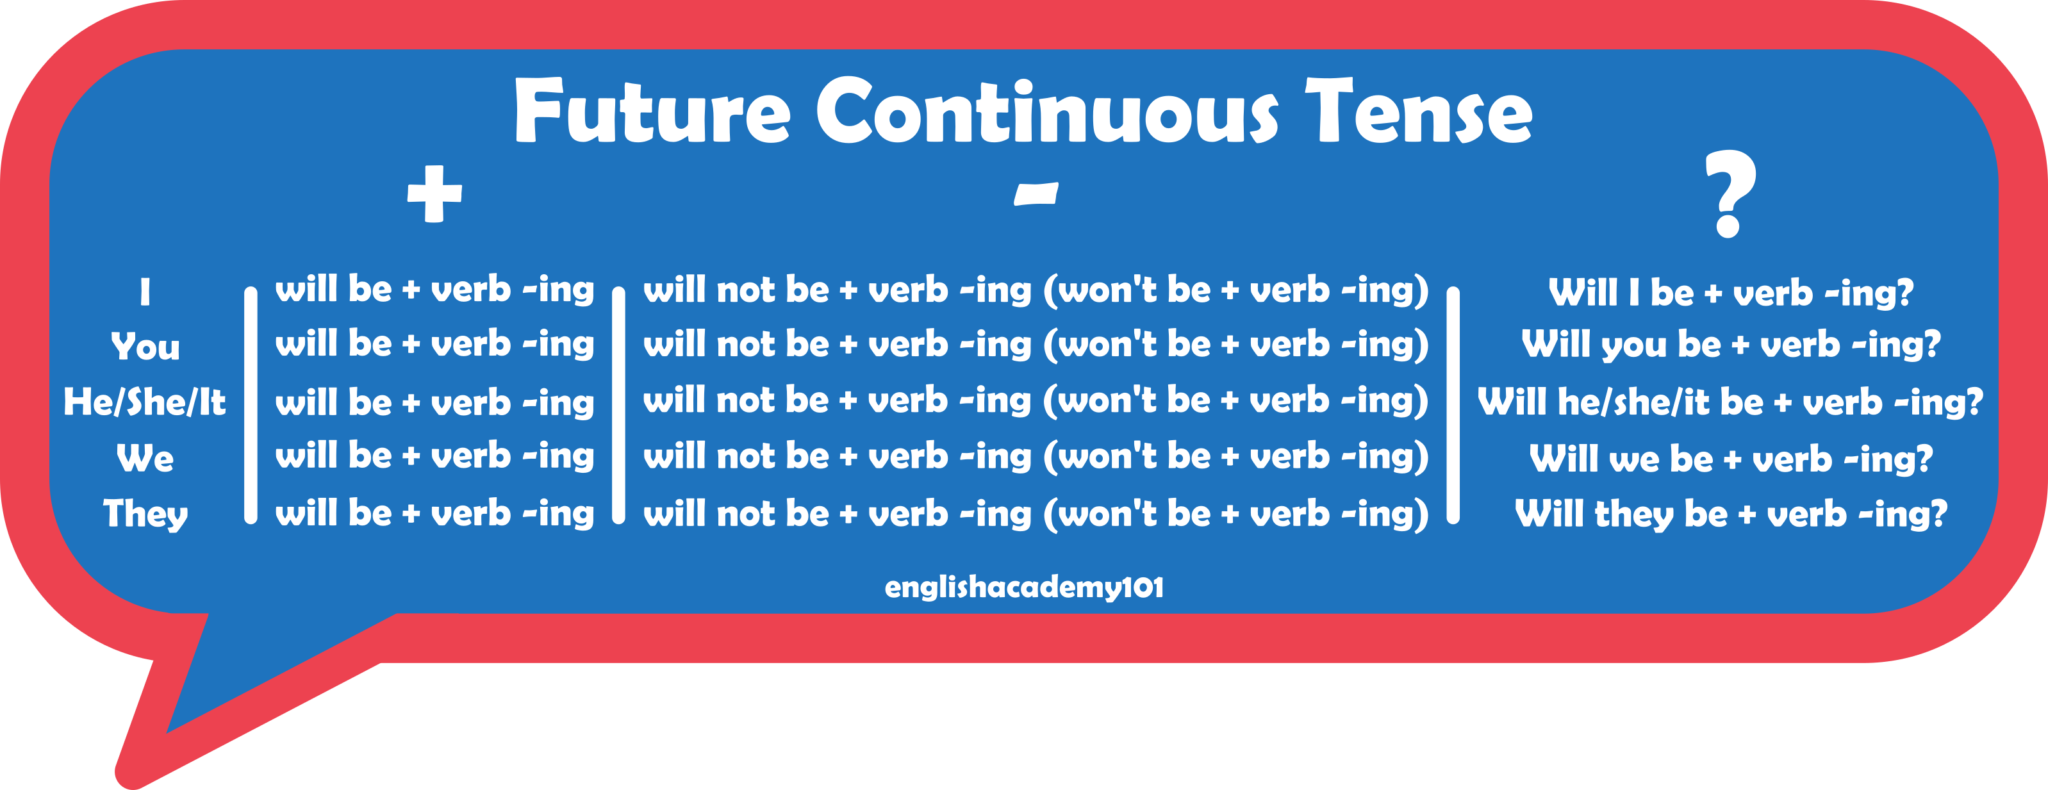 future-continuous-tense-archives-englishacademy101